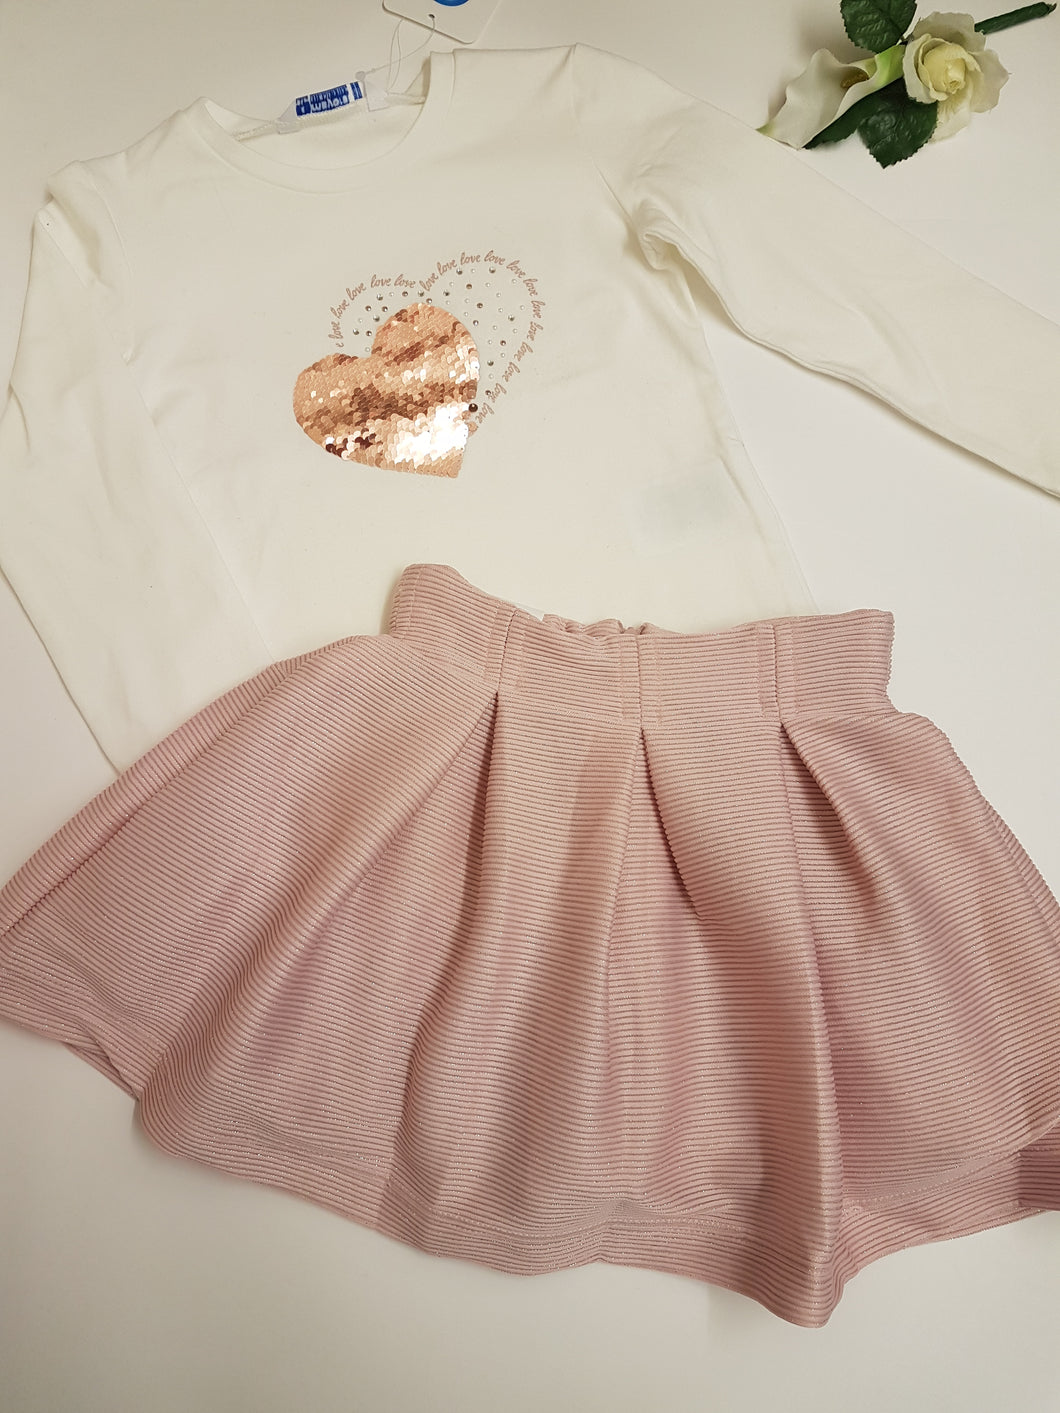 Heart top and skirt - pink 9 year